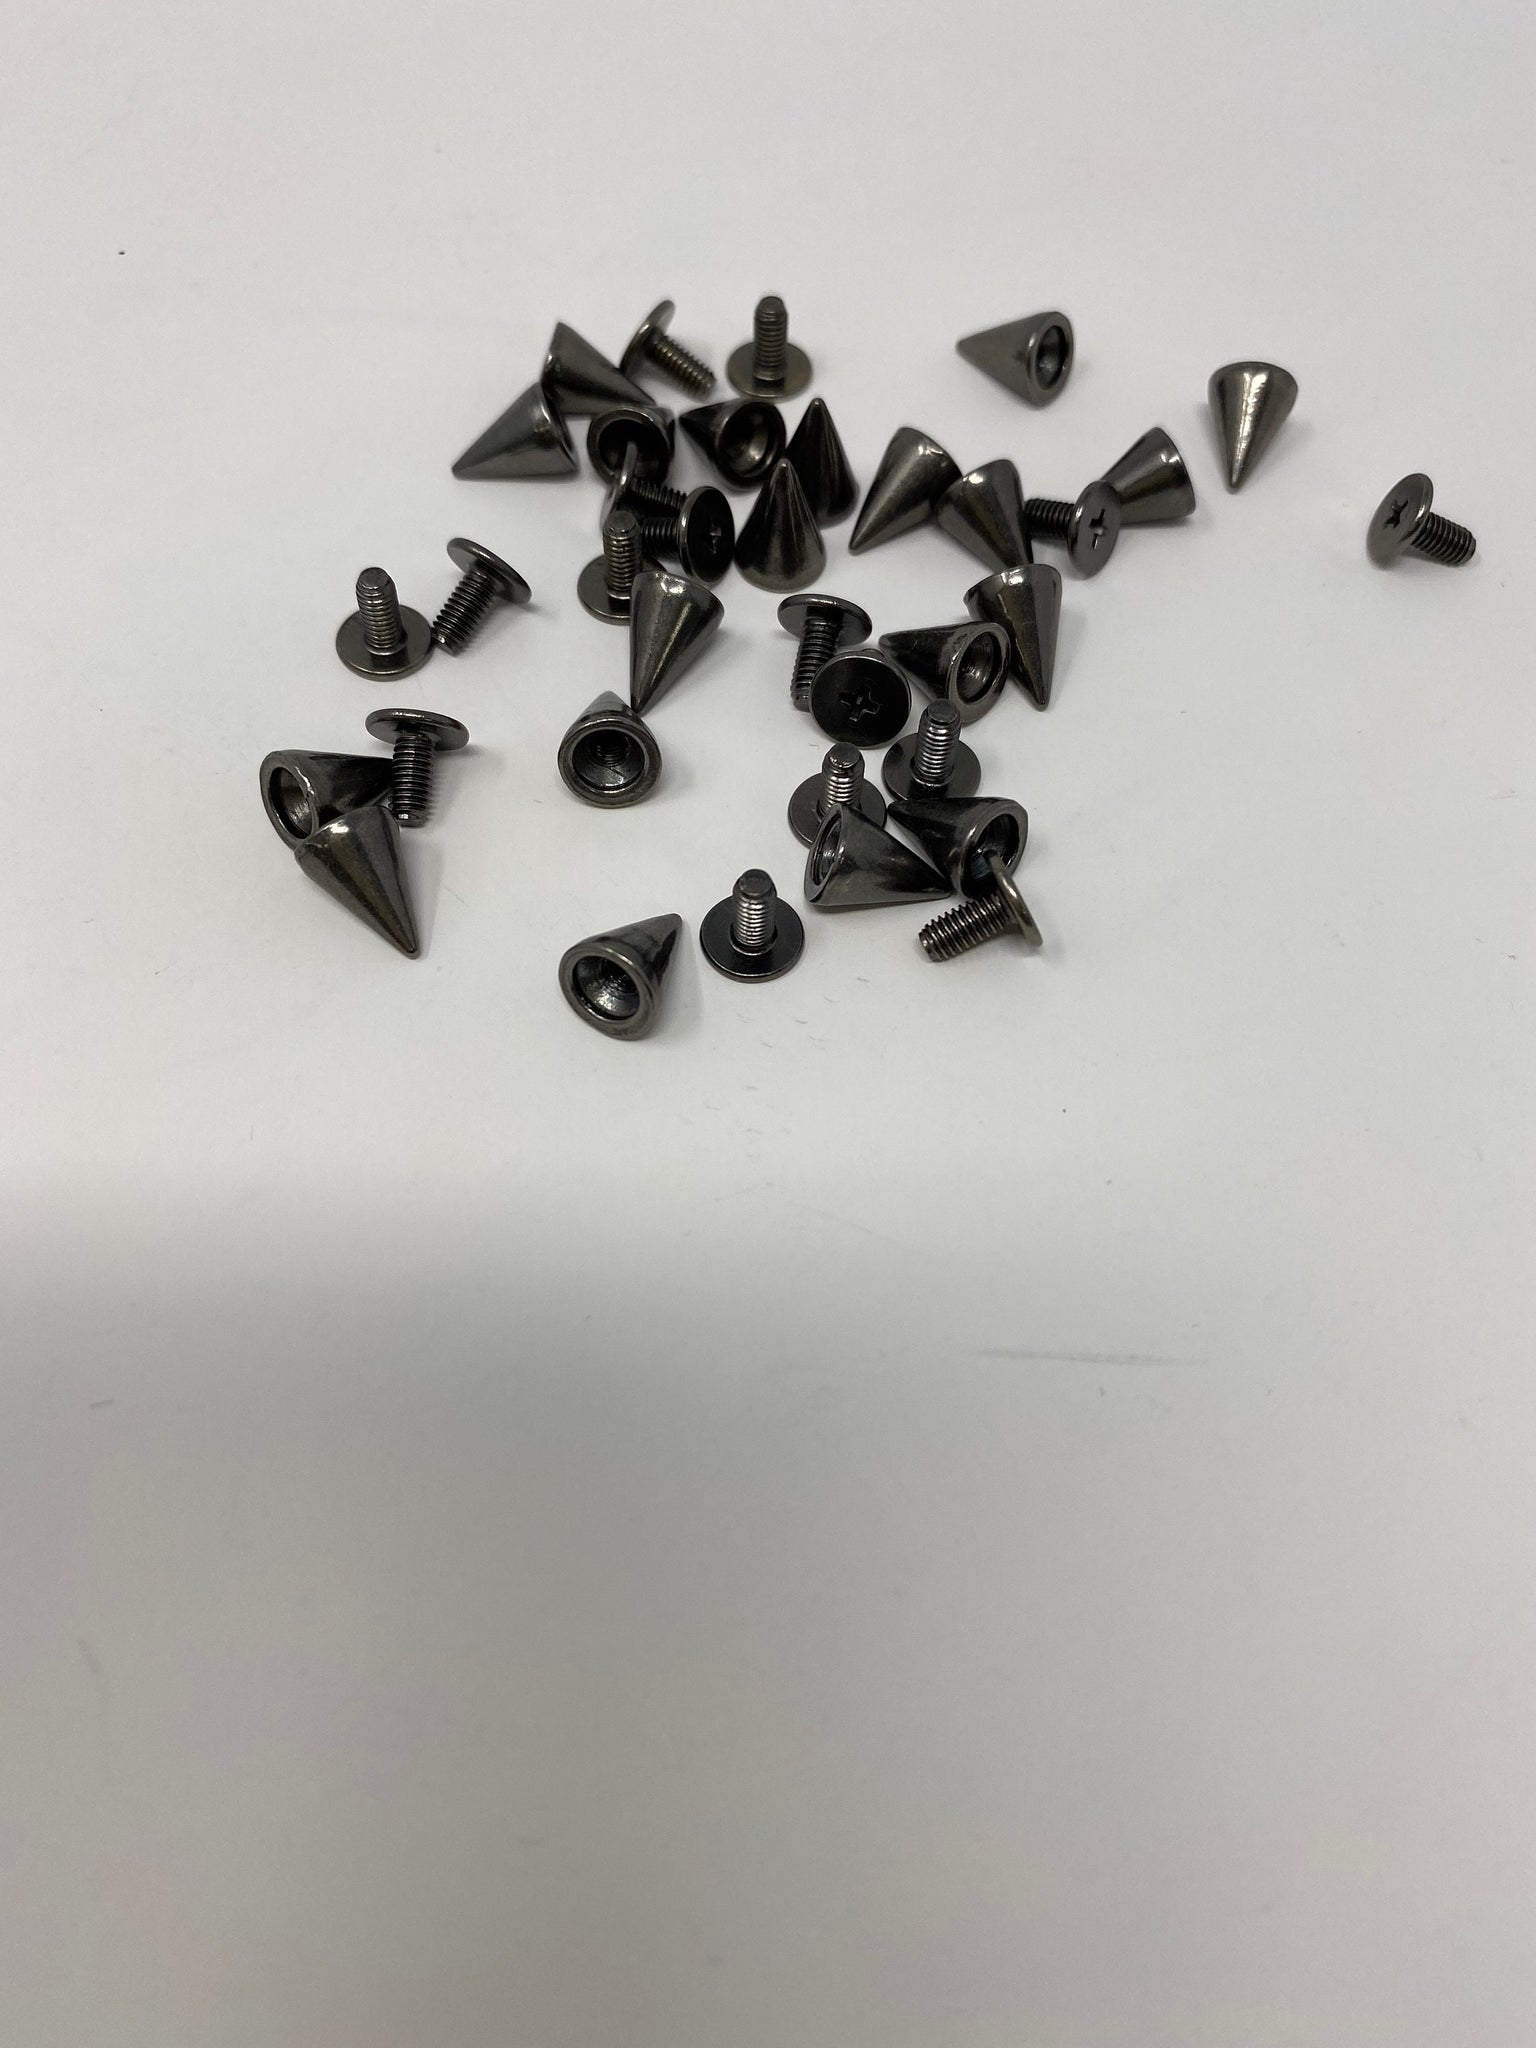 NEW, Screw on Spikes, 10mm 3/8 Black Spiked Studs, Cone Spikes